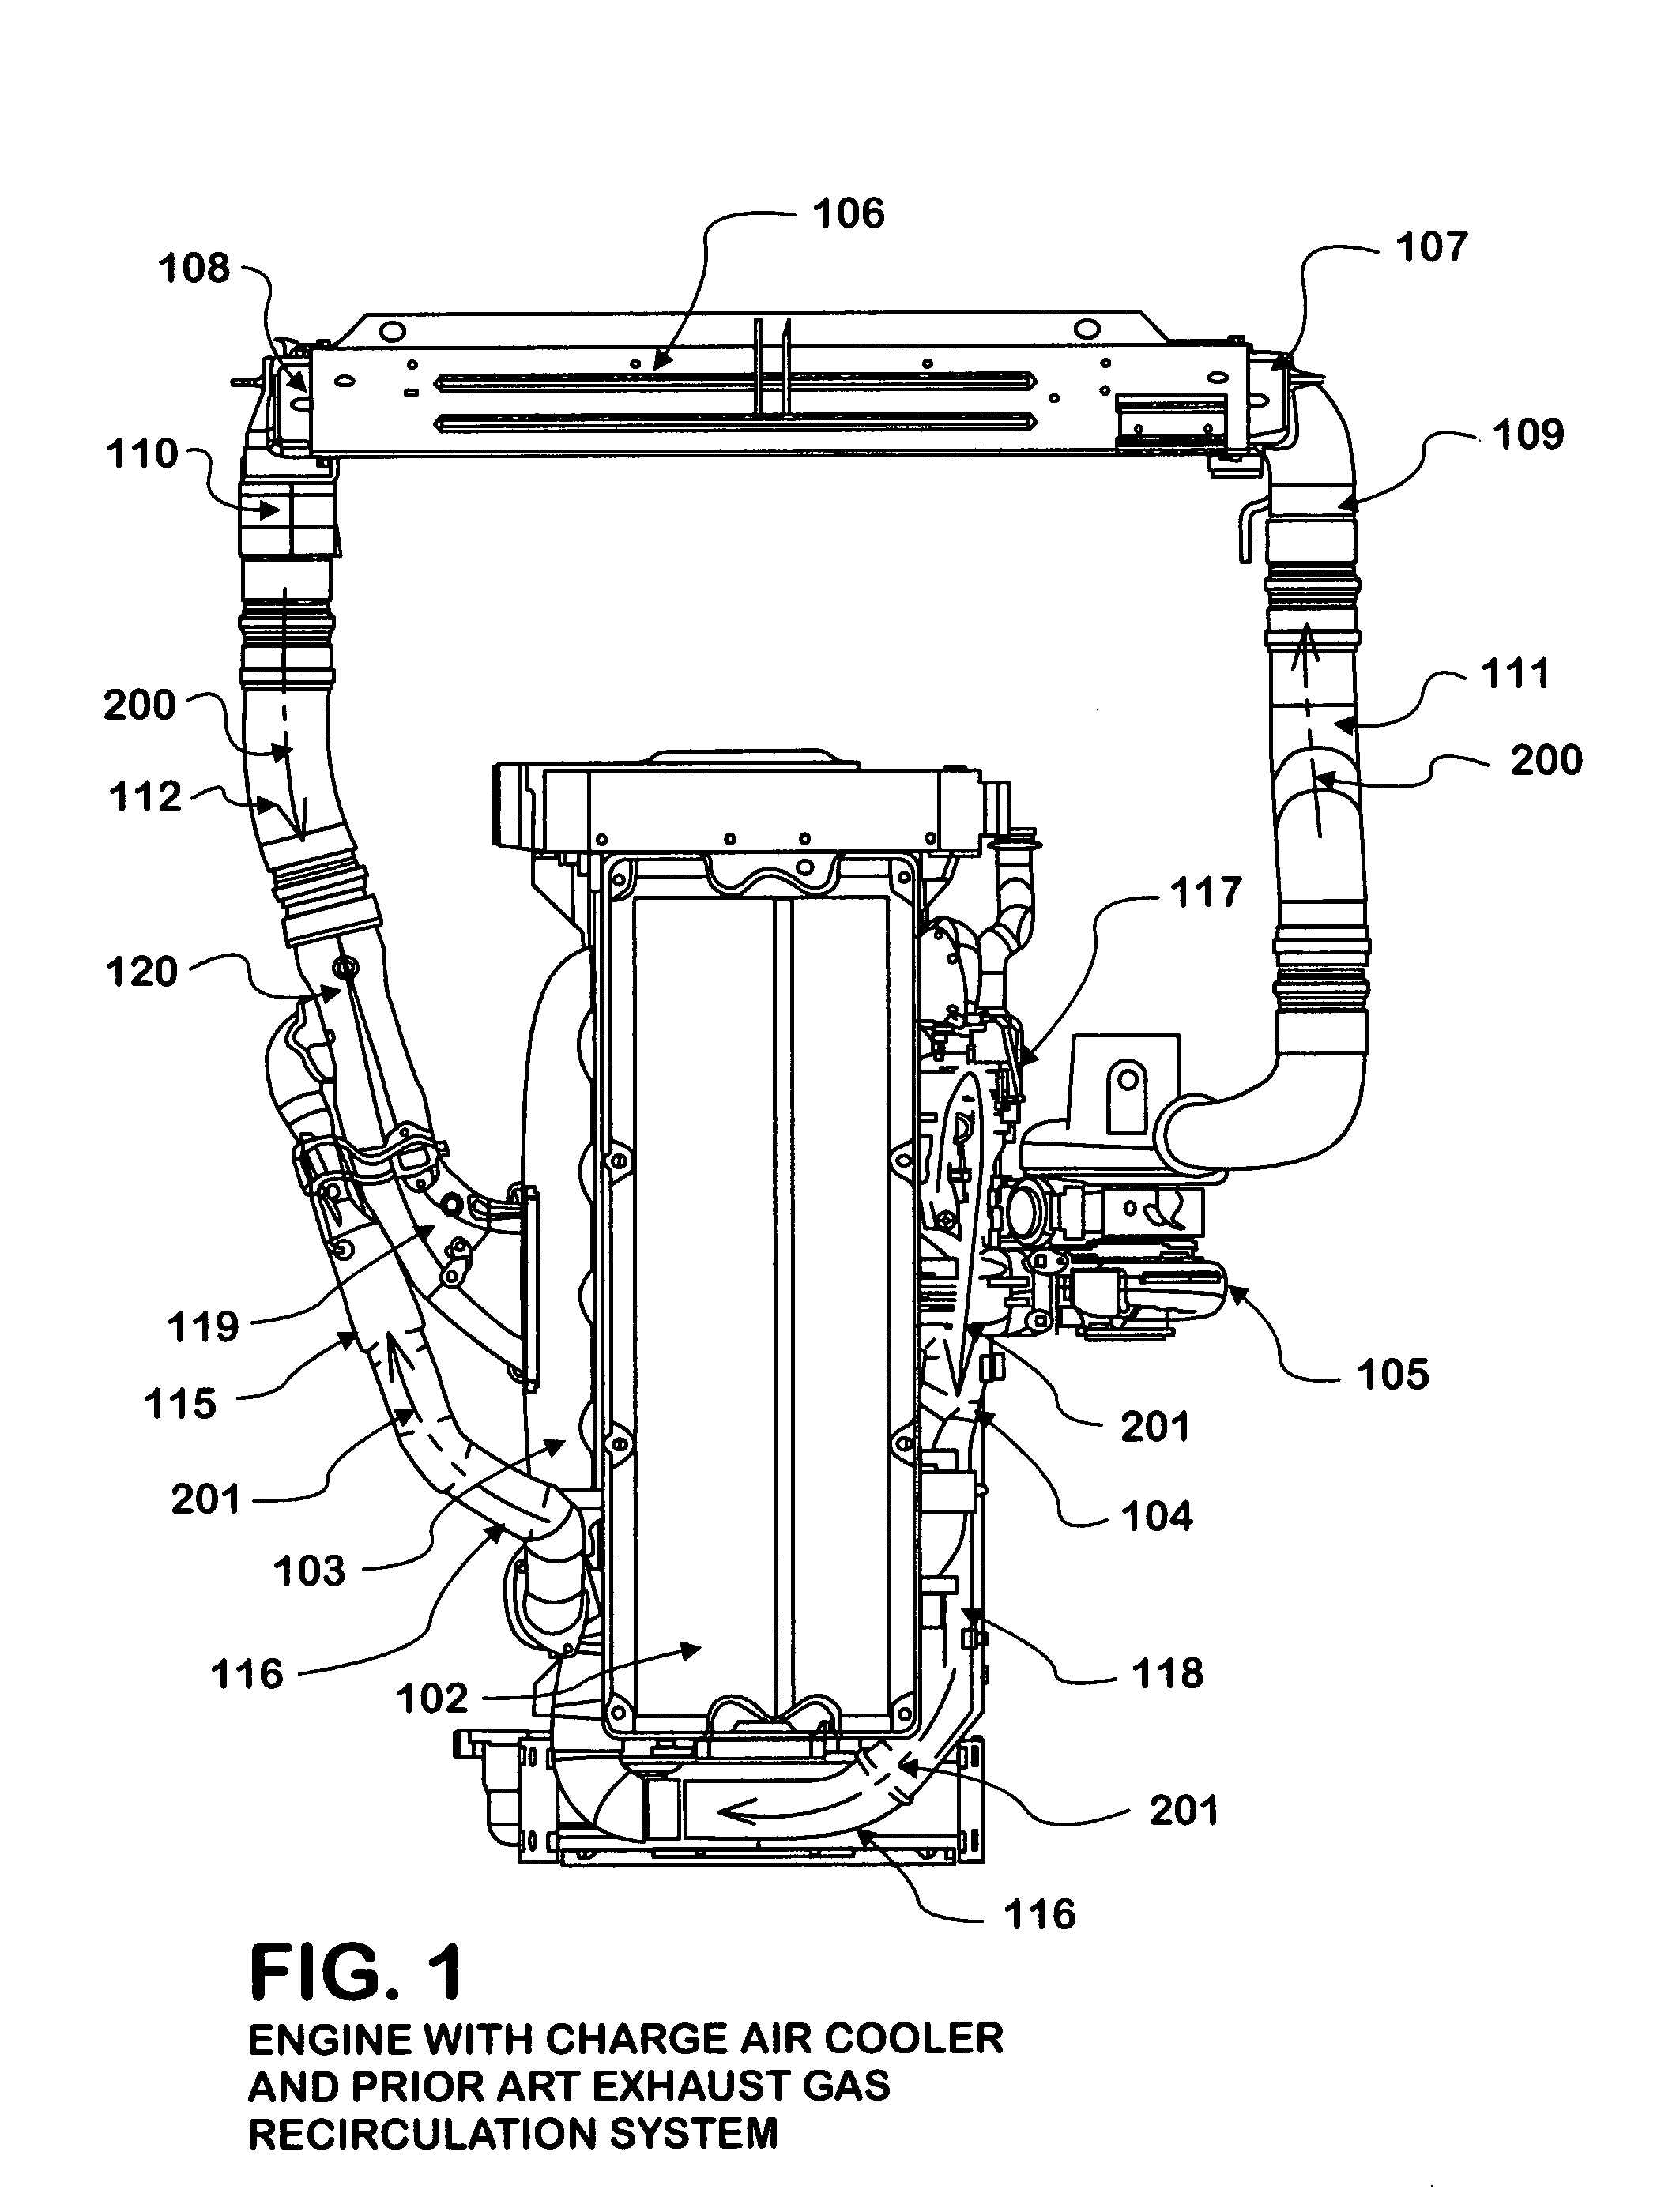 Integrated charge air cooler and exhaust gas recirculation mixer